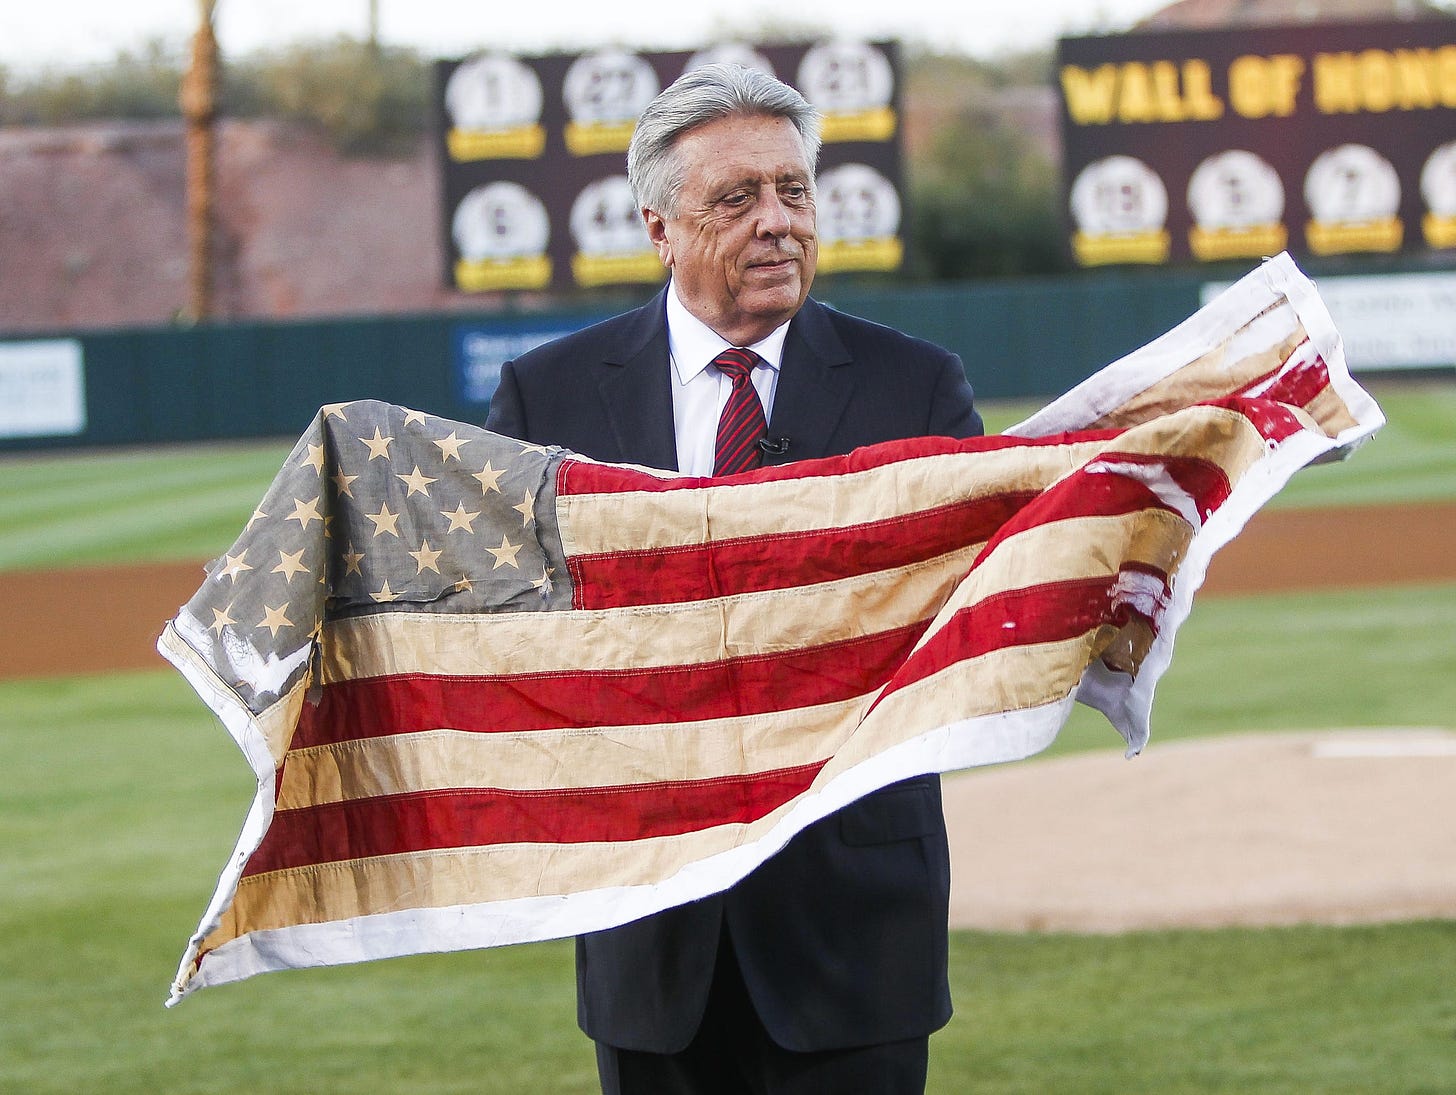 Forty years ago, Rick Monday, a former Arizona State baseball player, stepped in to save a U.S. flag from being burned by protesters at Dodger Stadium in Los Angeles.